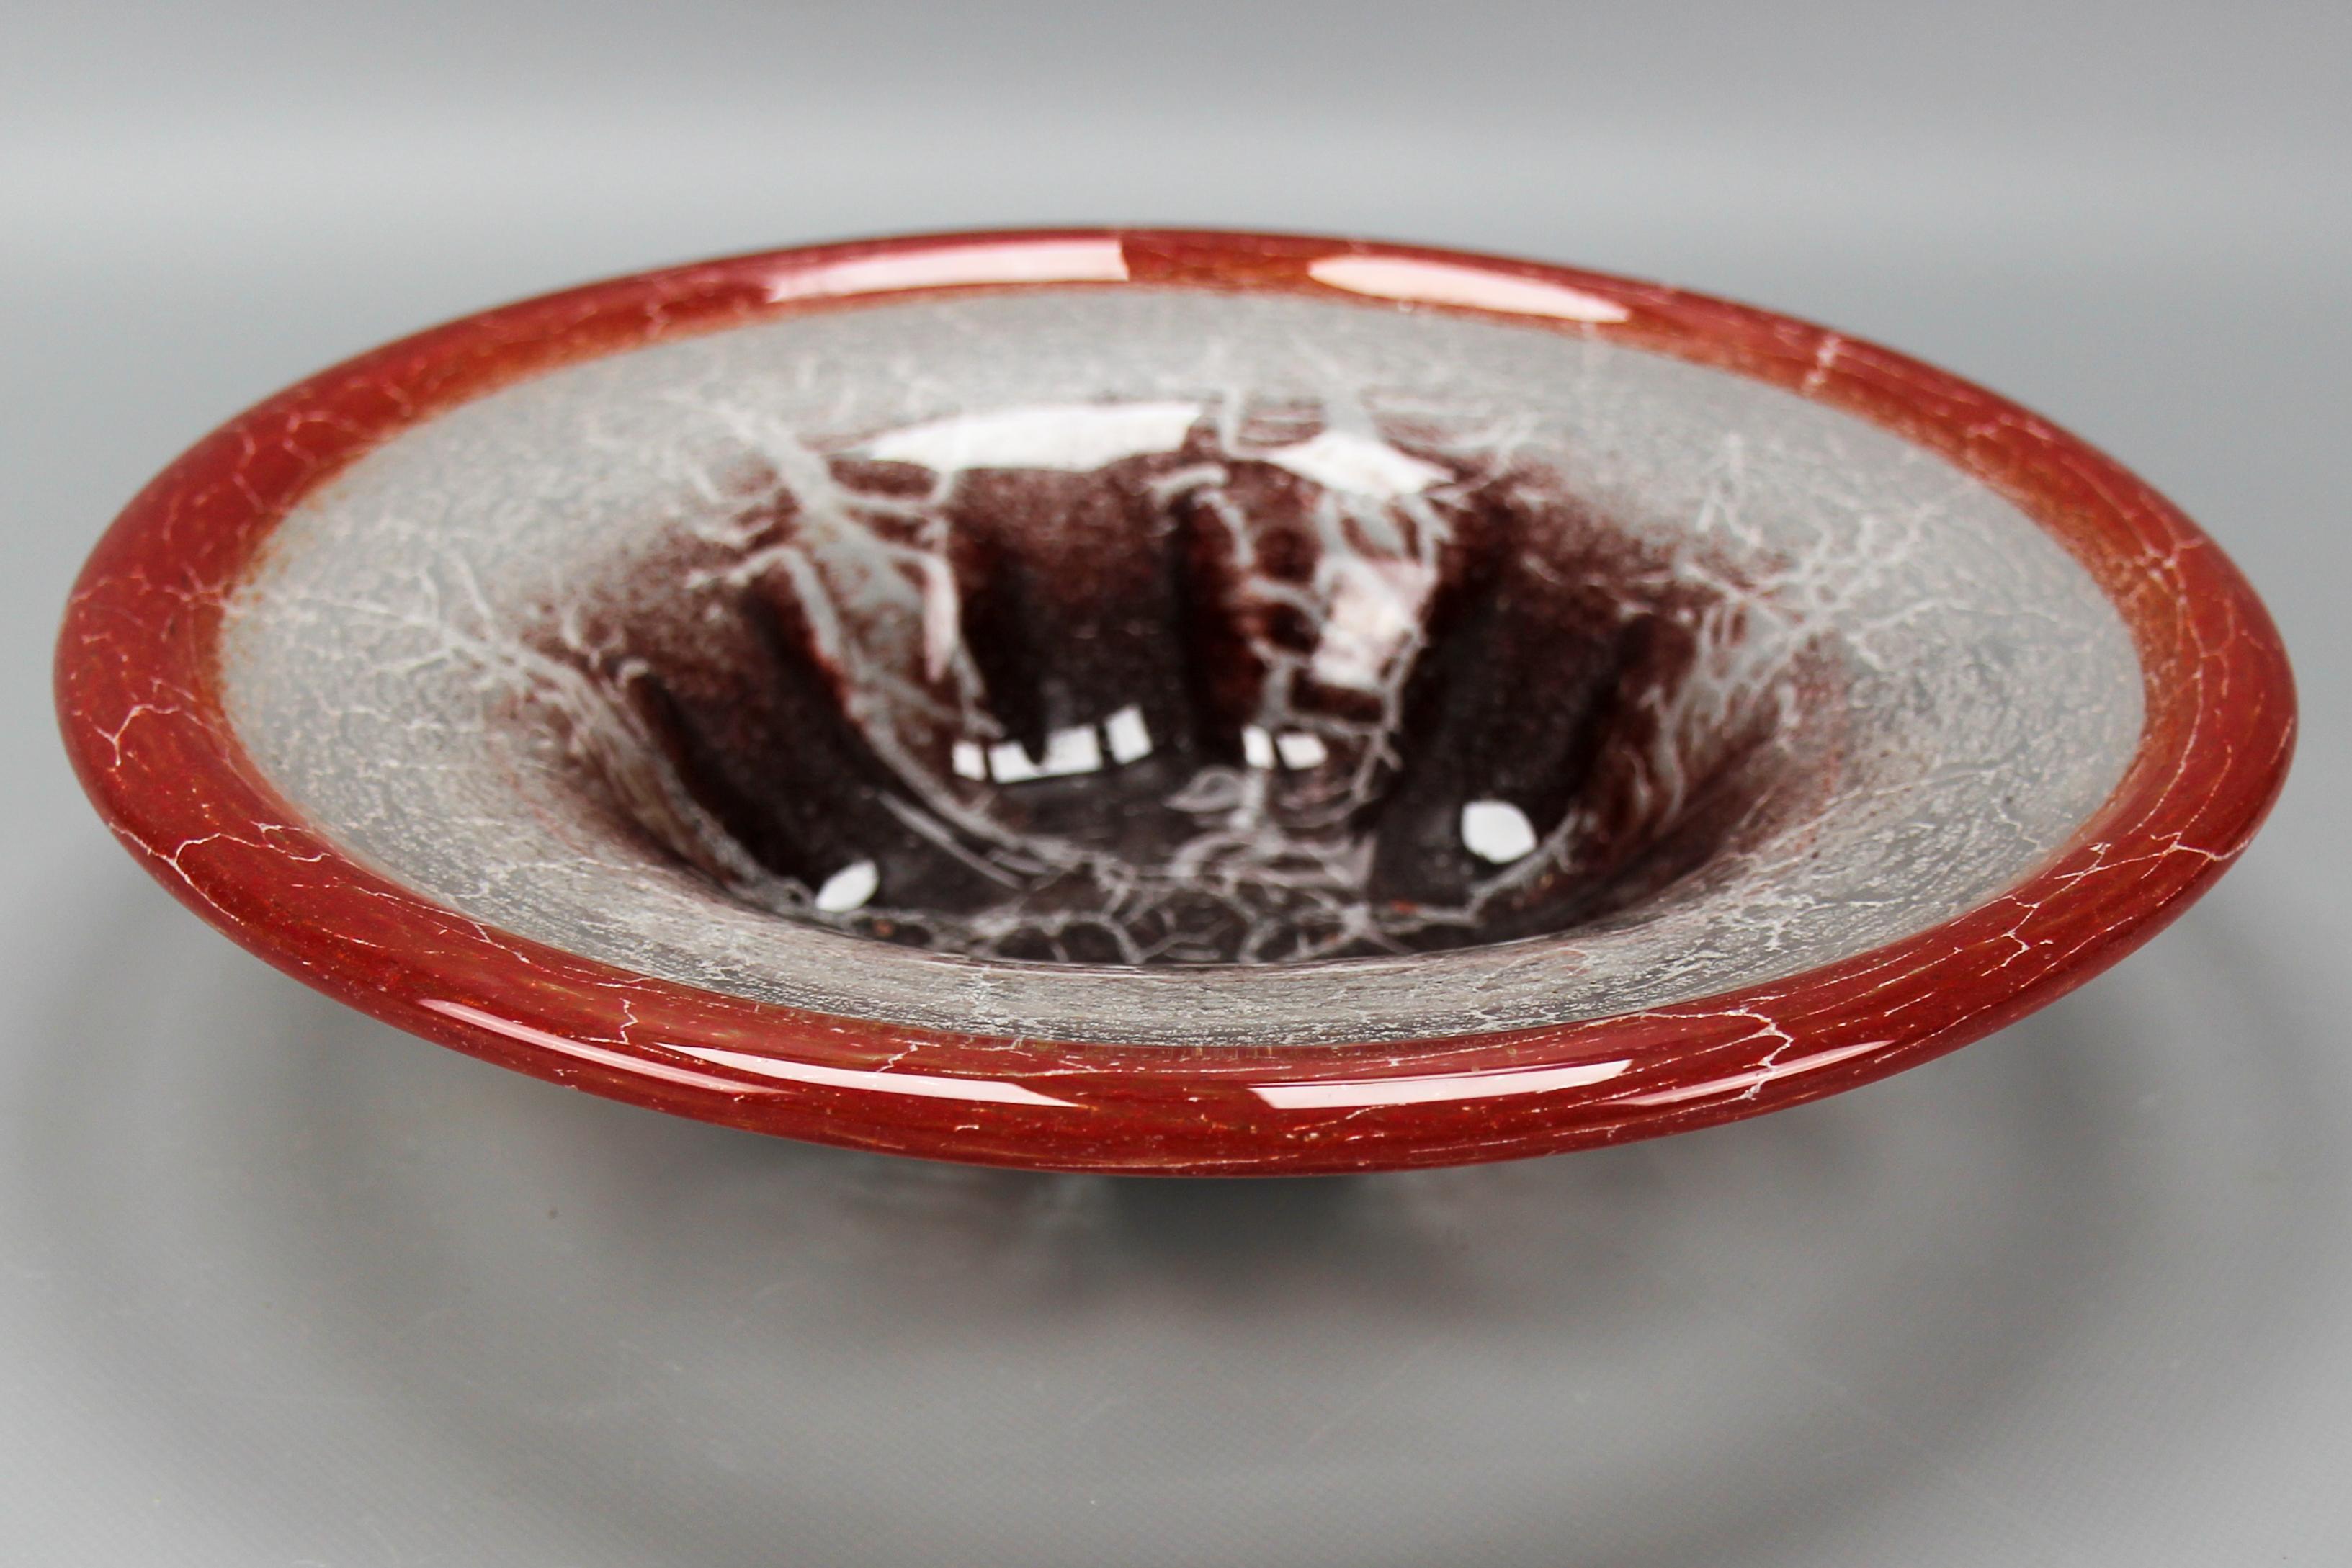 German Art Glass bowl in red, white, and burgundy by WMF Ikora, ca. 1930s.
This elegant and colorful Art Deco period bowl, features mouth-blown 'Ikora-Crystal' glass with net-like powder melting in red, white, and burgundy colors, folded edge. The